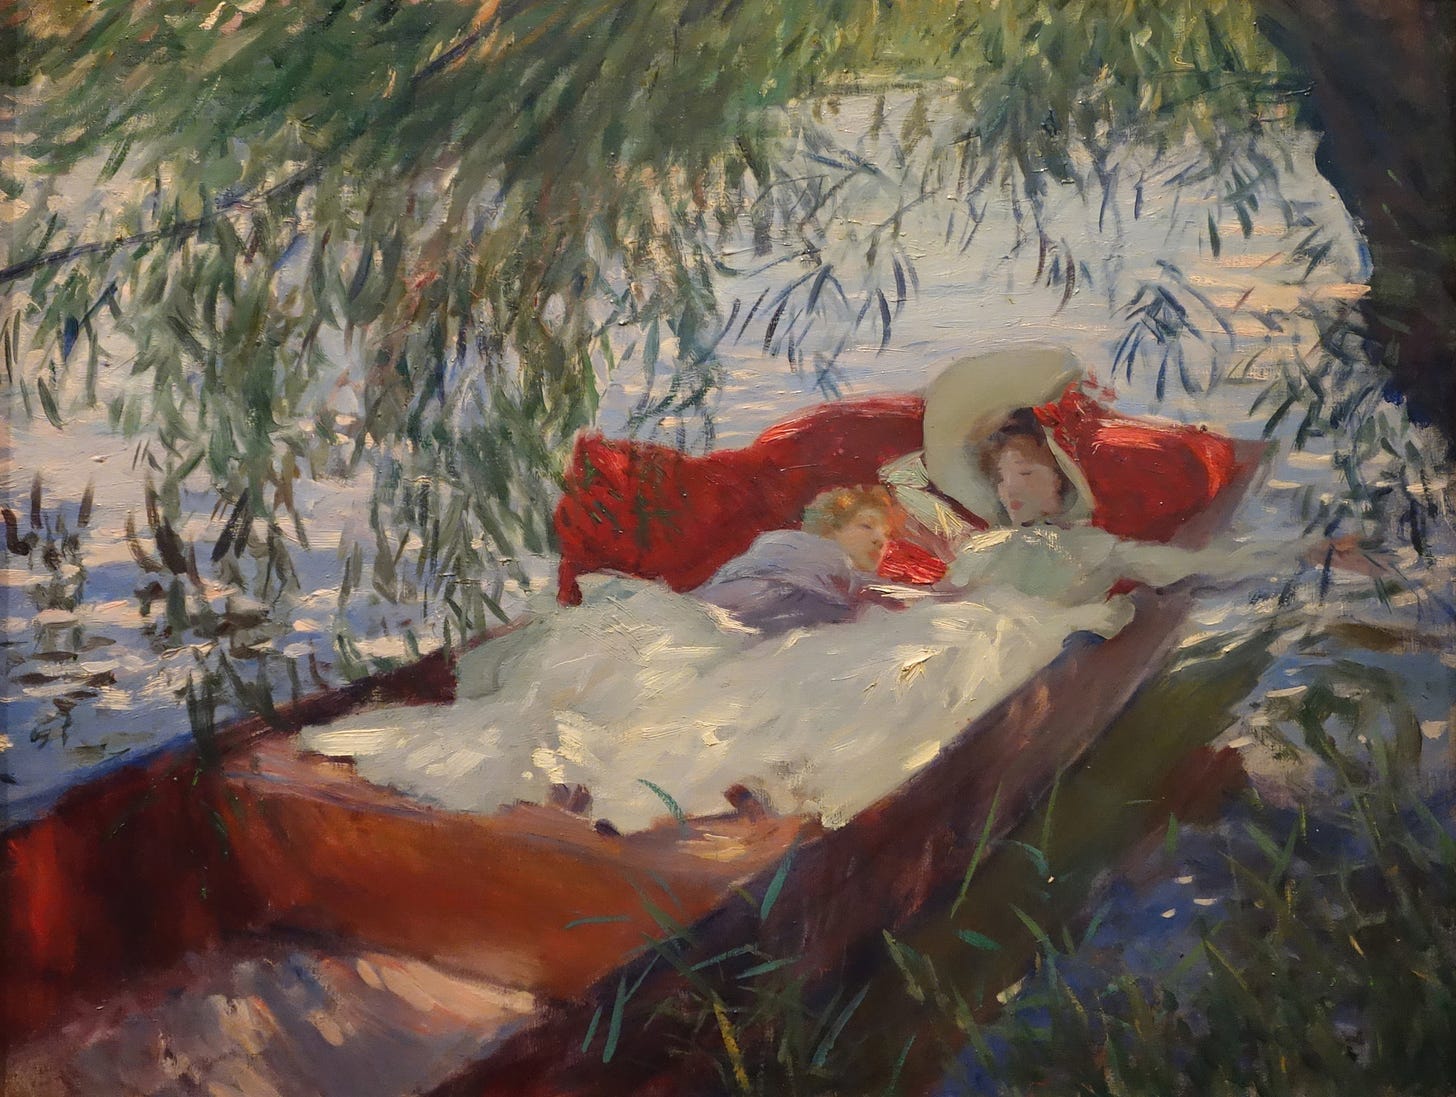 Lady and Child Asleep in a Punt under the Willows (1887)